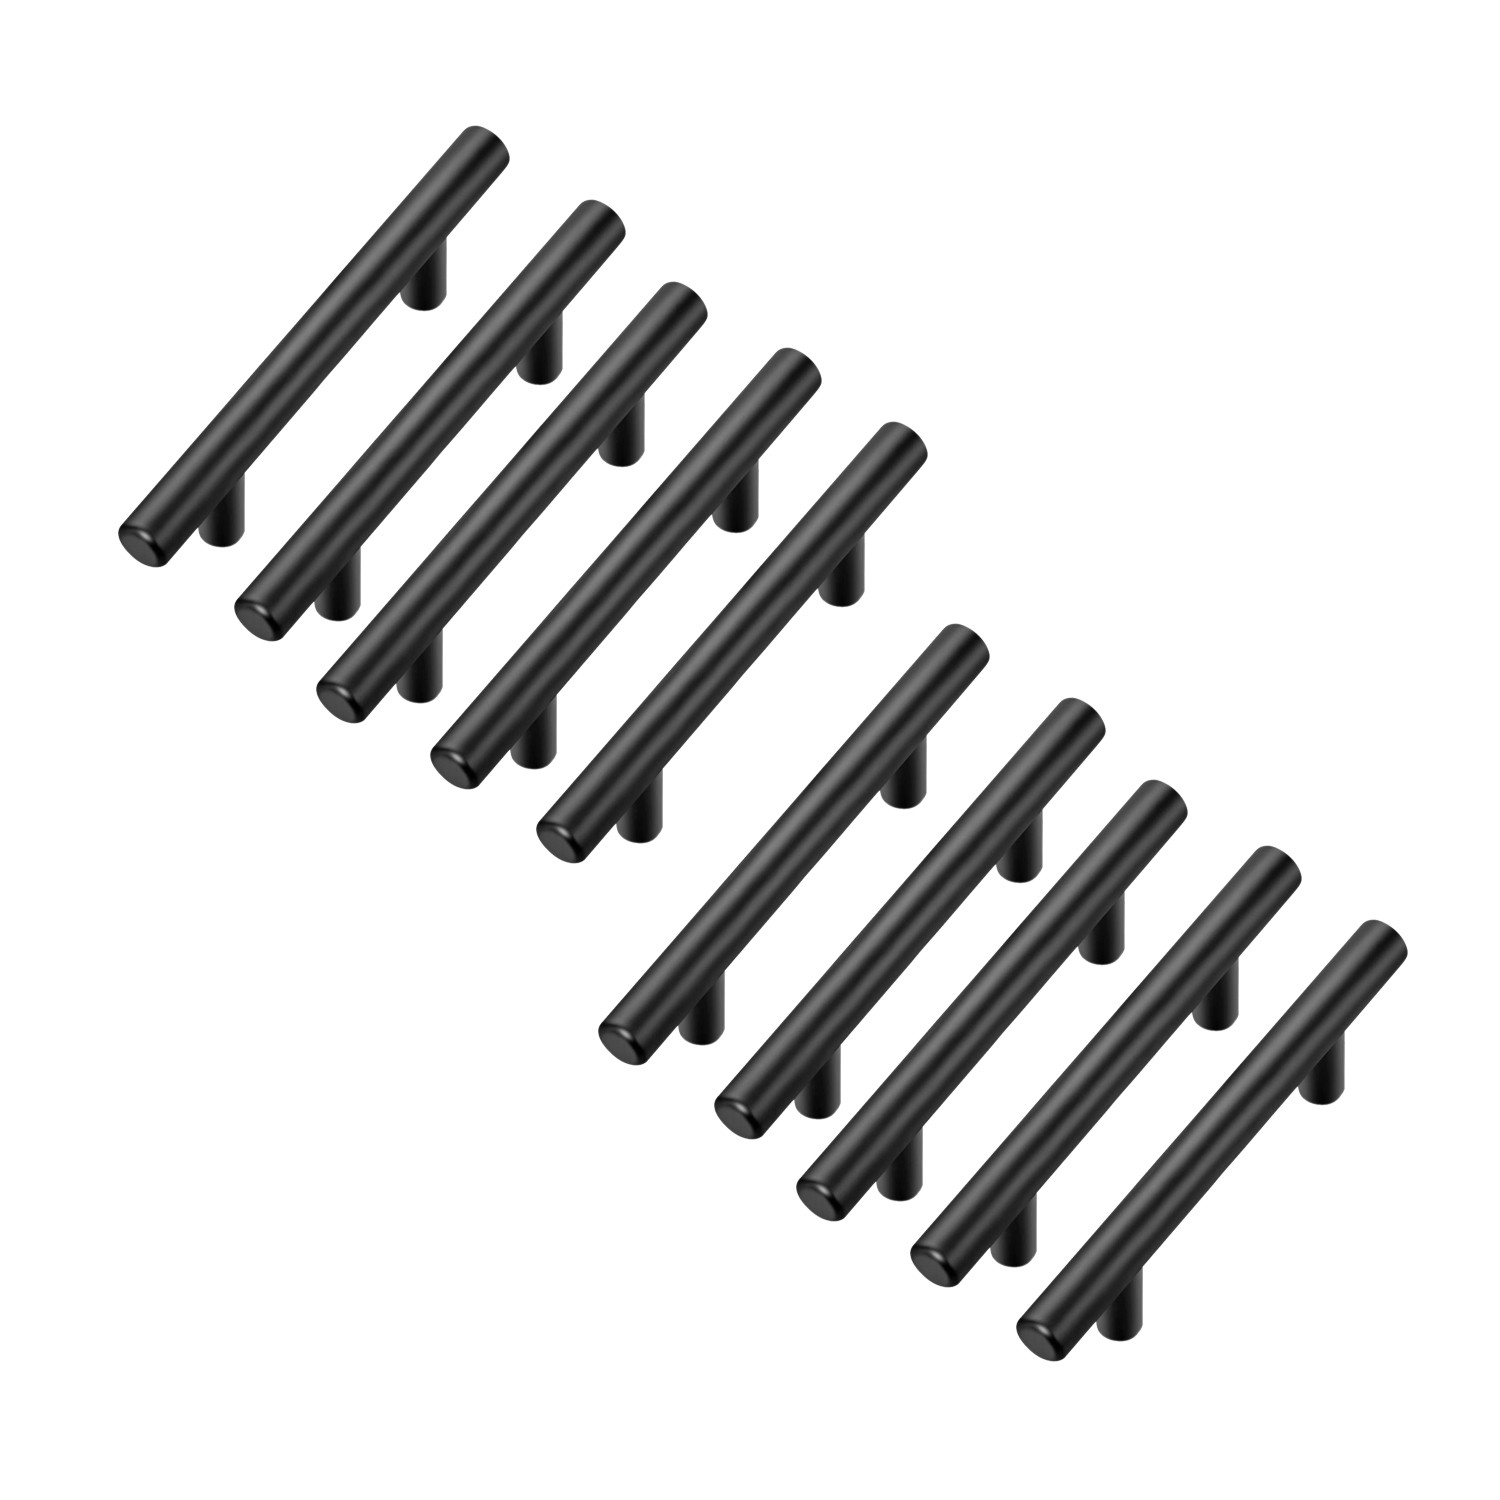 10 Pack 5 Inch Cabinet Pulls Matte Black Stainless Steel Kitchen Cupboard Handles Cabinet Handles 5 Inch Length